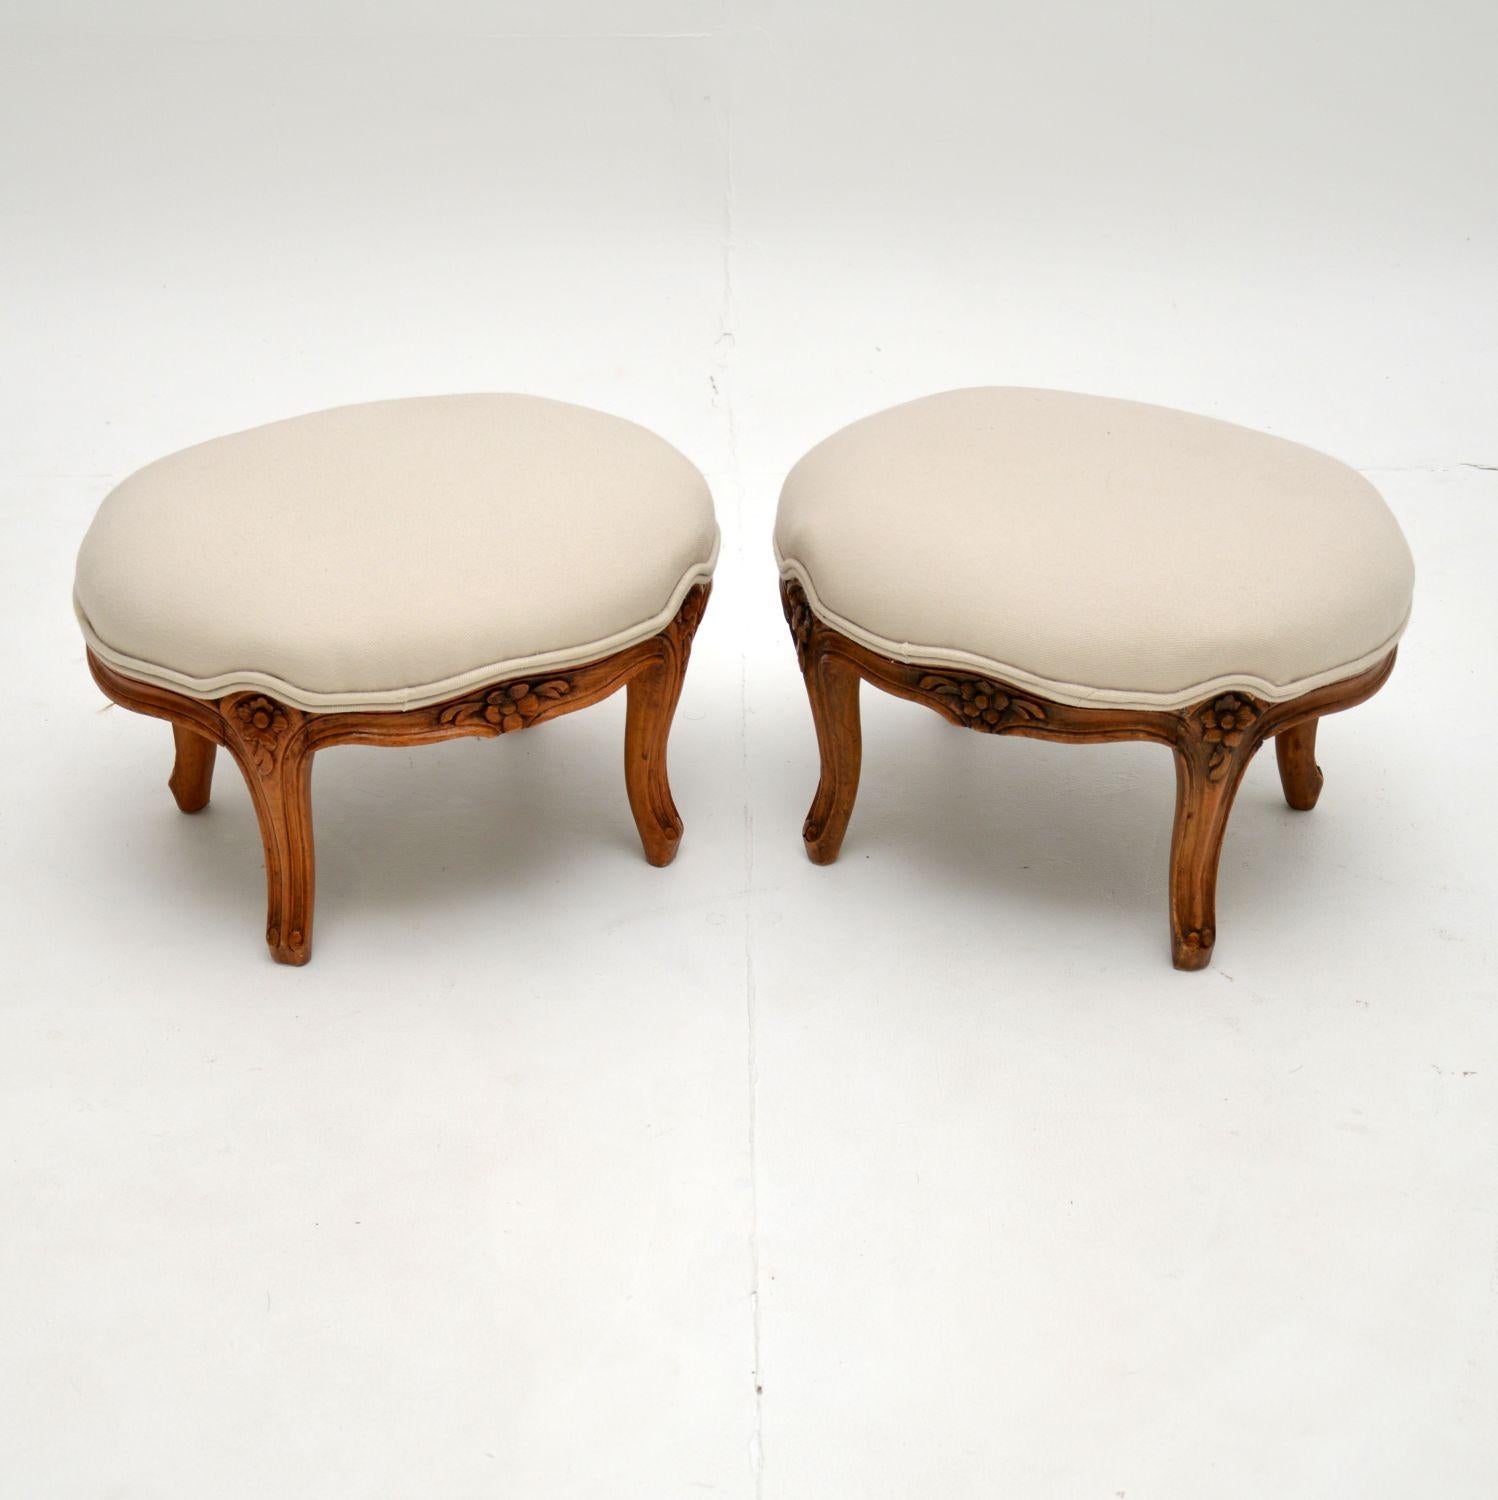 A beautiful pair of small oval antique French style foot stools, which I would date from around the 1920-30’s period.

They are of excellent quality, the bases are solid walnut with crisp and intricate floral carving.

The condition is lovely